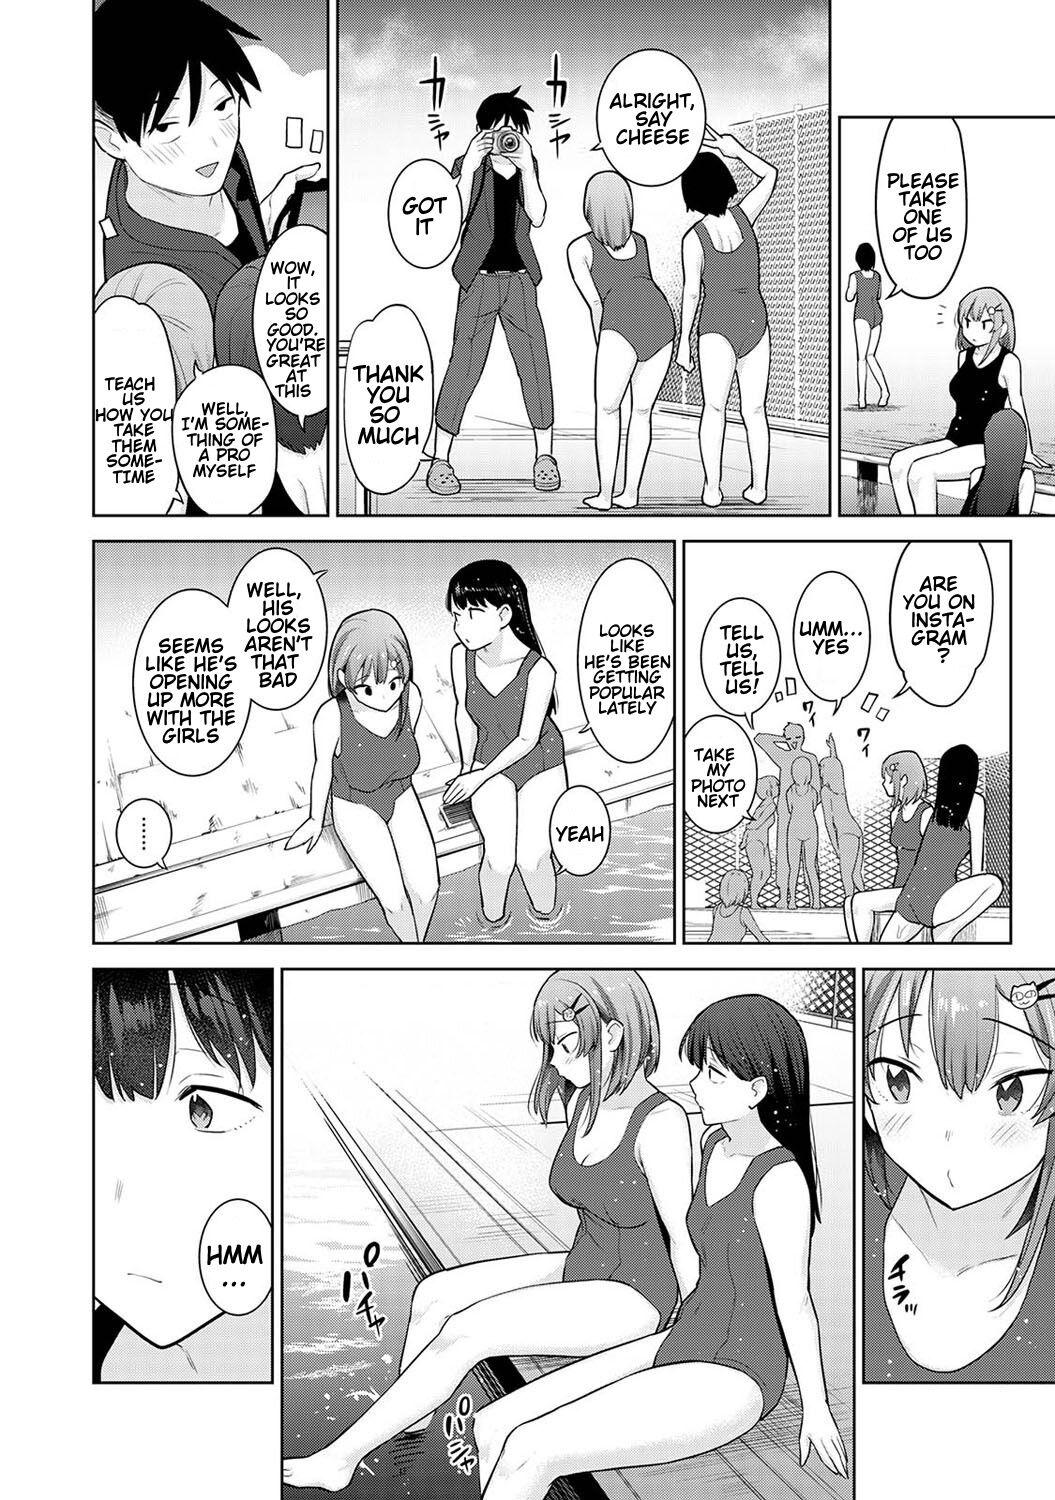 Teensnow SotsuAl Cameraman to Shite Ichinenkan Joshikou no Event e Doukou Suru Koto ni Natta Hanashi | A Story About How I Ended Up Being A Yearbook Cameraman at an All Girls' School For A Year Ch. 5 Peeing - Page 3